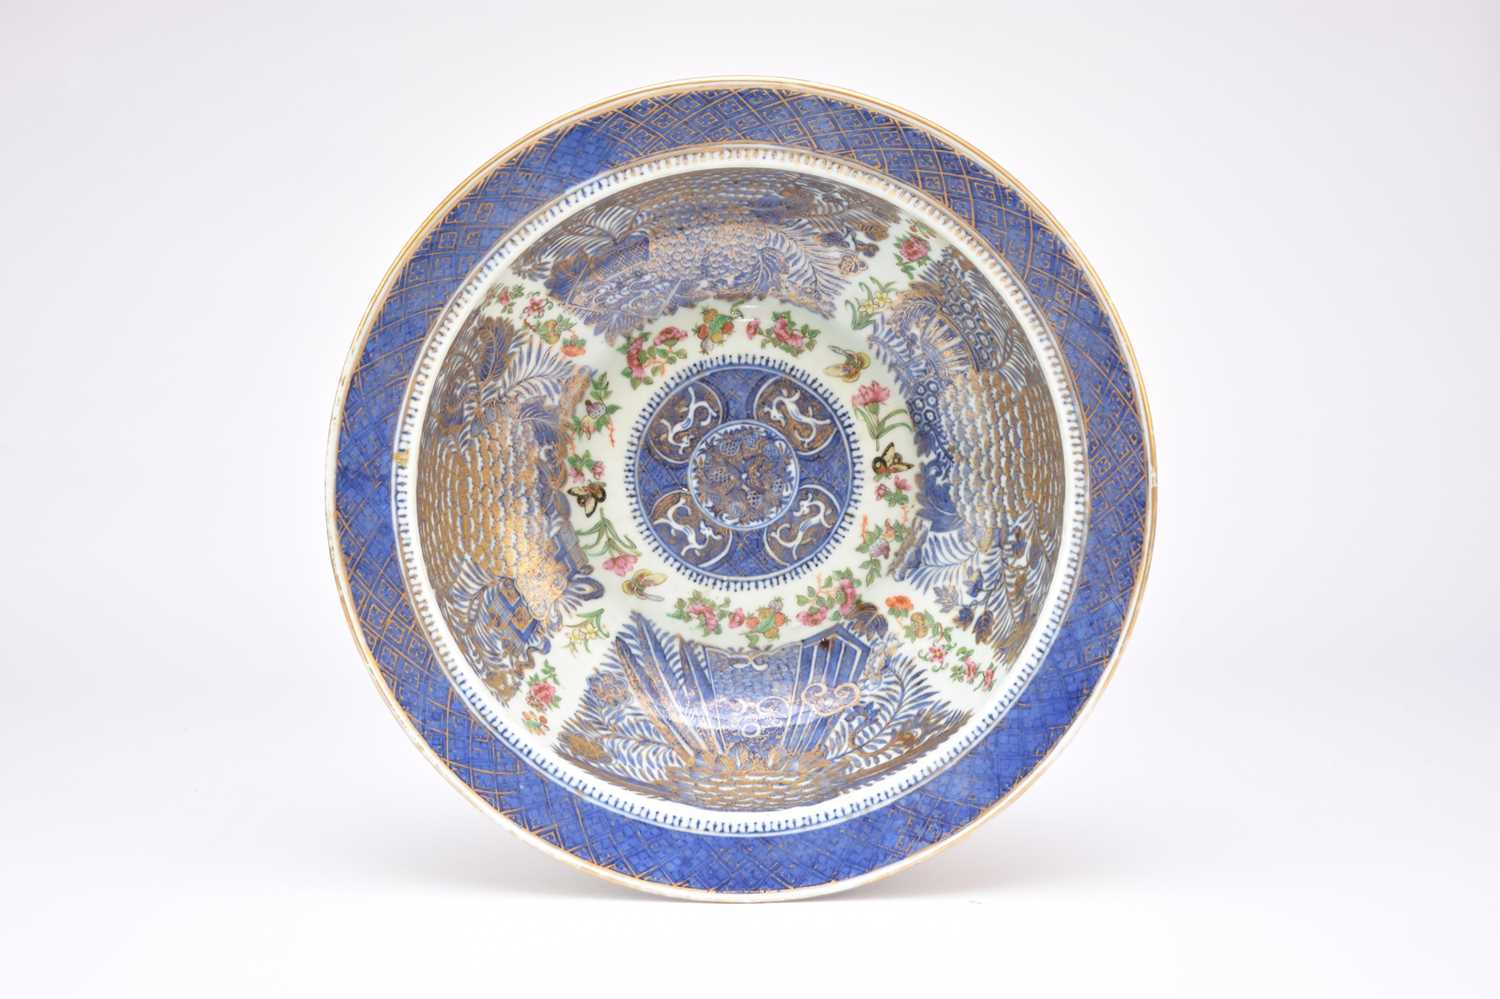 A Chinese export enamelled blue and white punch bowl, 18th century